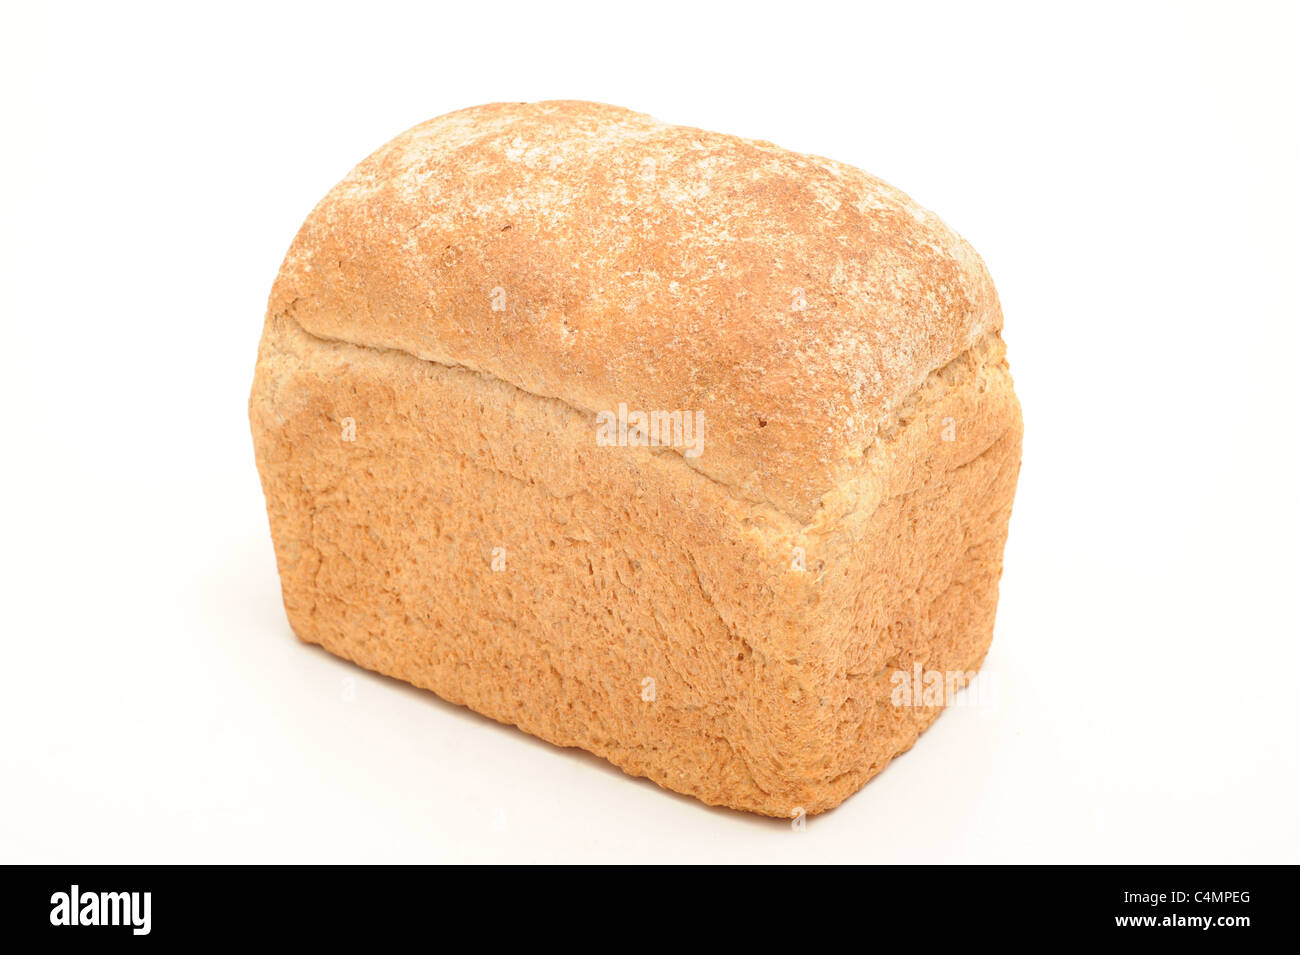 Photograph of a loaf of Bread Stock Photo